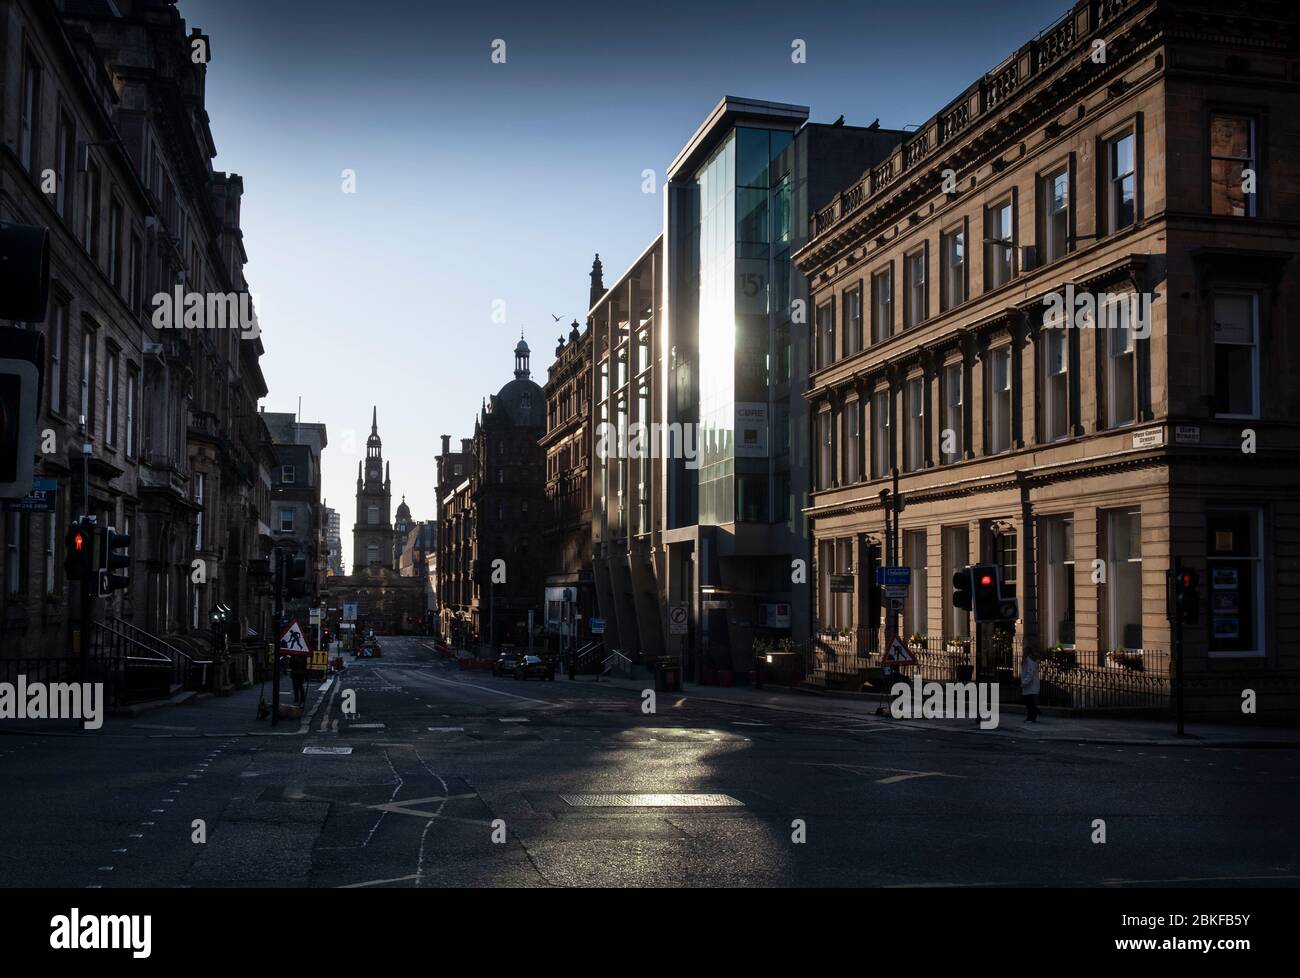 West George street in Glasgow during the Covid-19 lockdown. Stock Photo